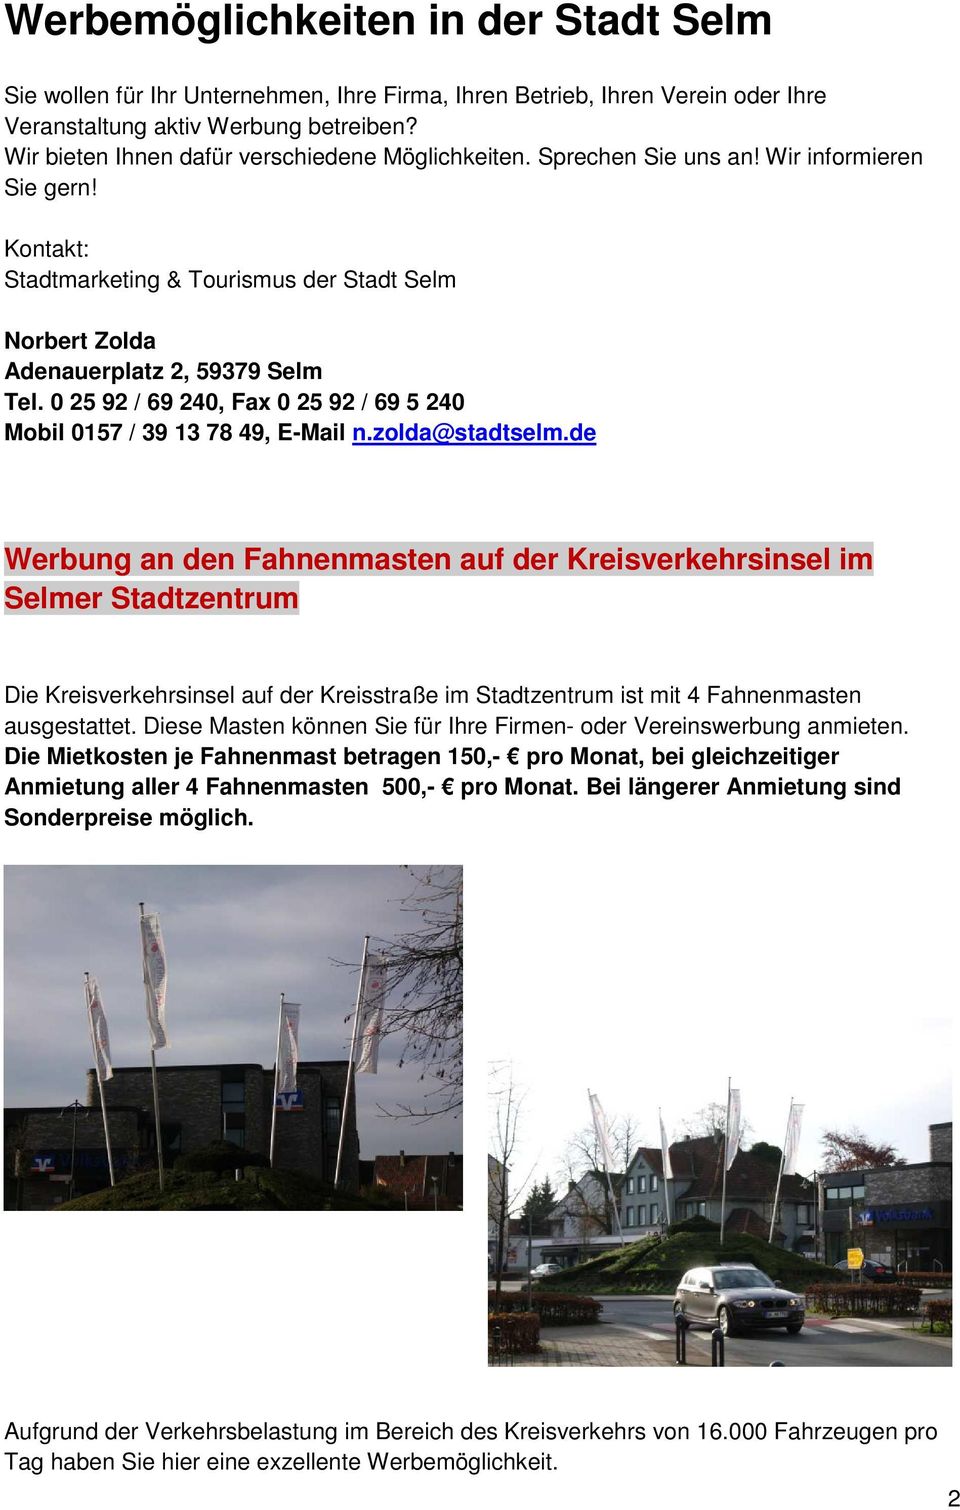 0 25 92 / 69 240, Fax 0 25 92 / 69 5 240 Mobil 0157 / 39 13 78 49, E-Mail n.zolda@stadtselm.